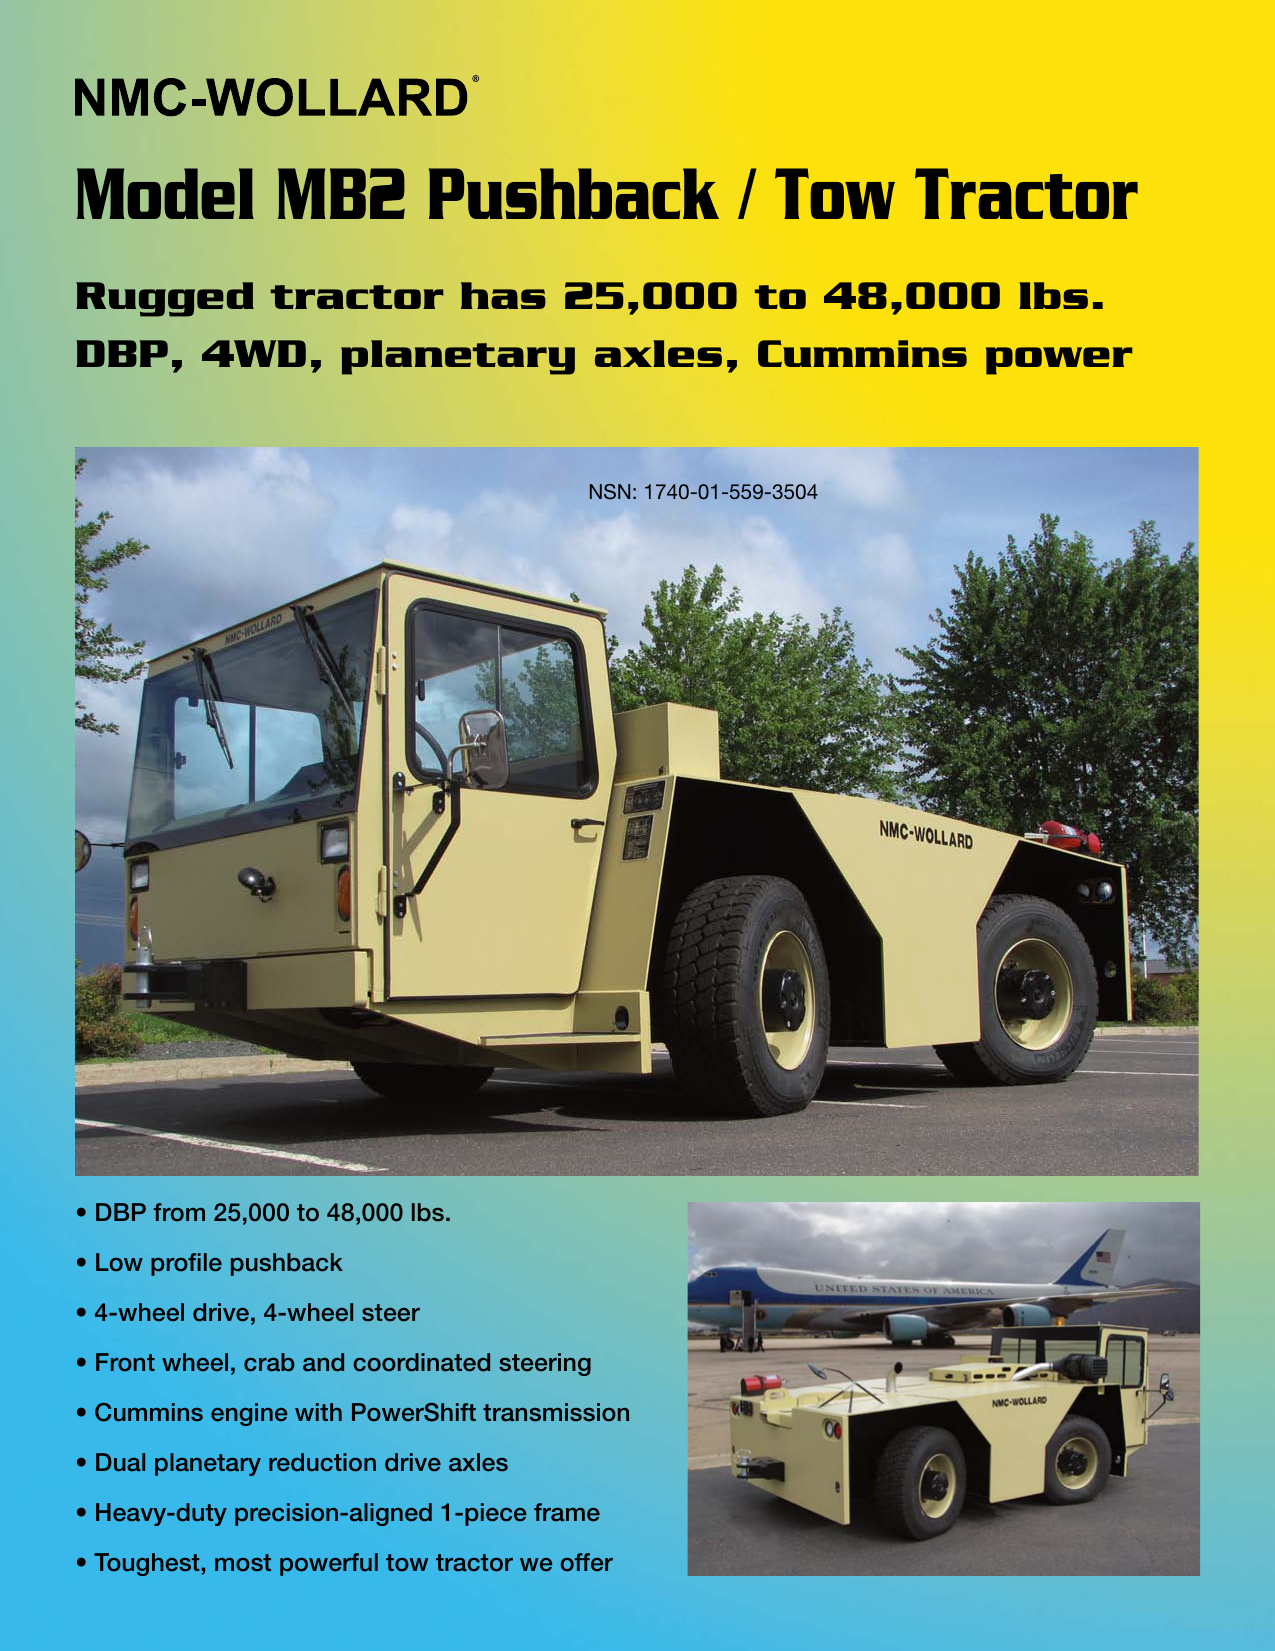 MAINTENANCE & PARTS MANUAL. Details about   FMC 600 TOW TRACTOR OPERATION 